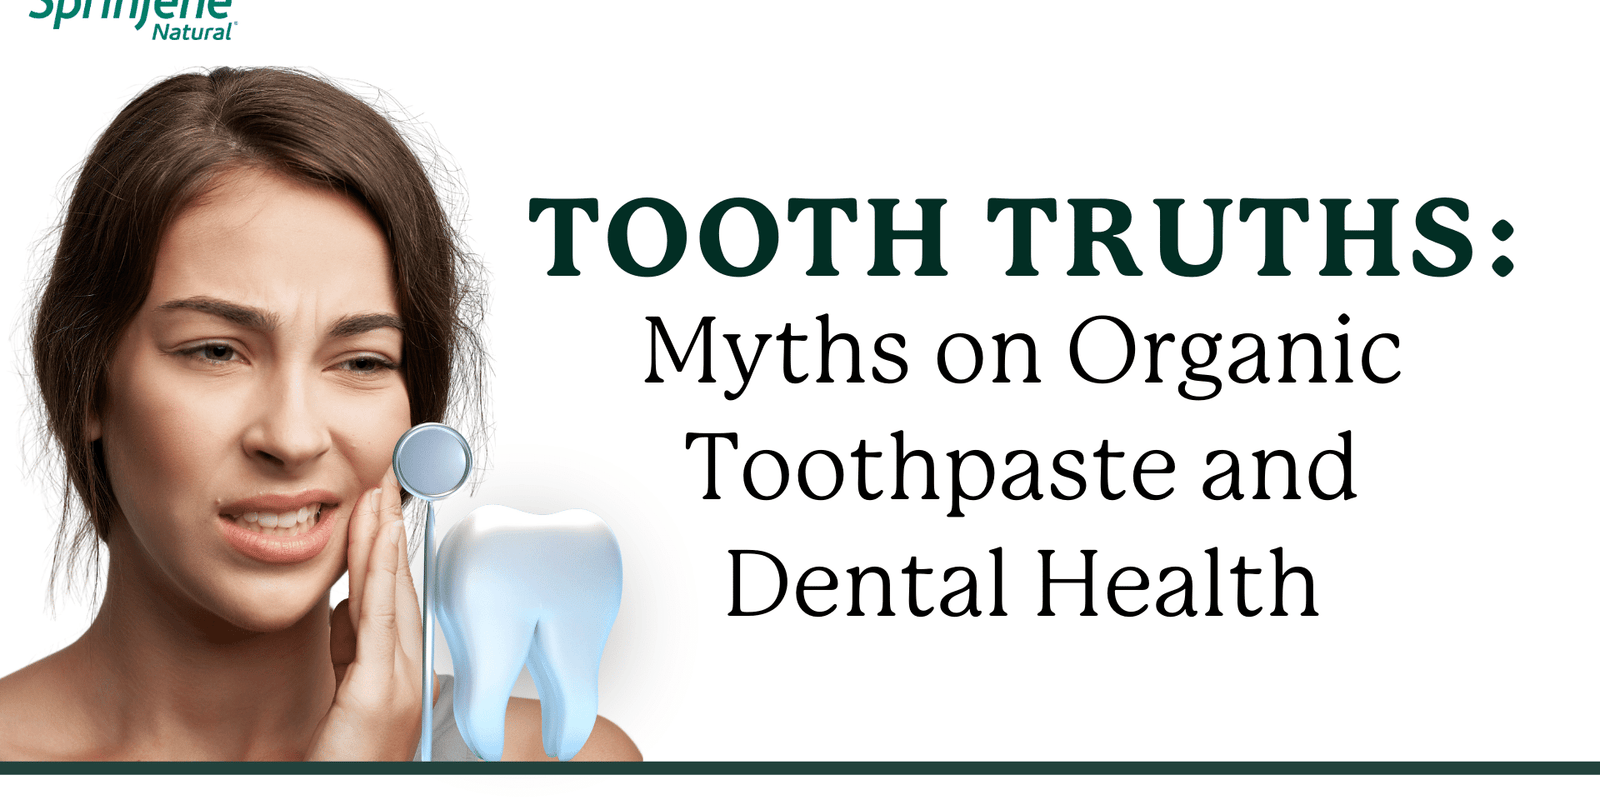 Tooth Truths: Myths on Organic Toothpaste and Dental Health